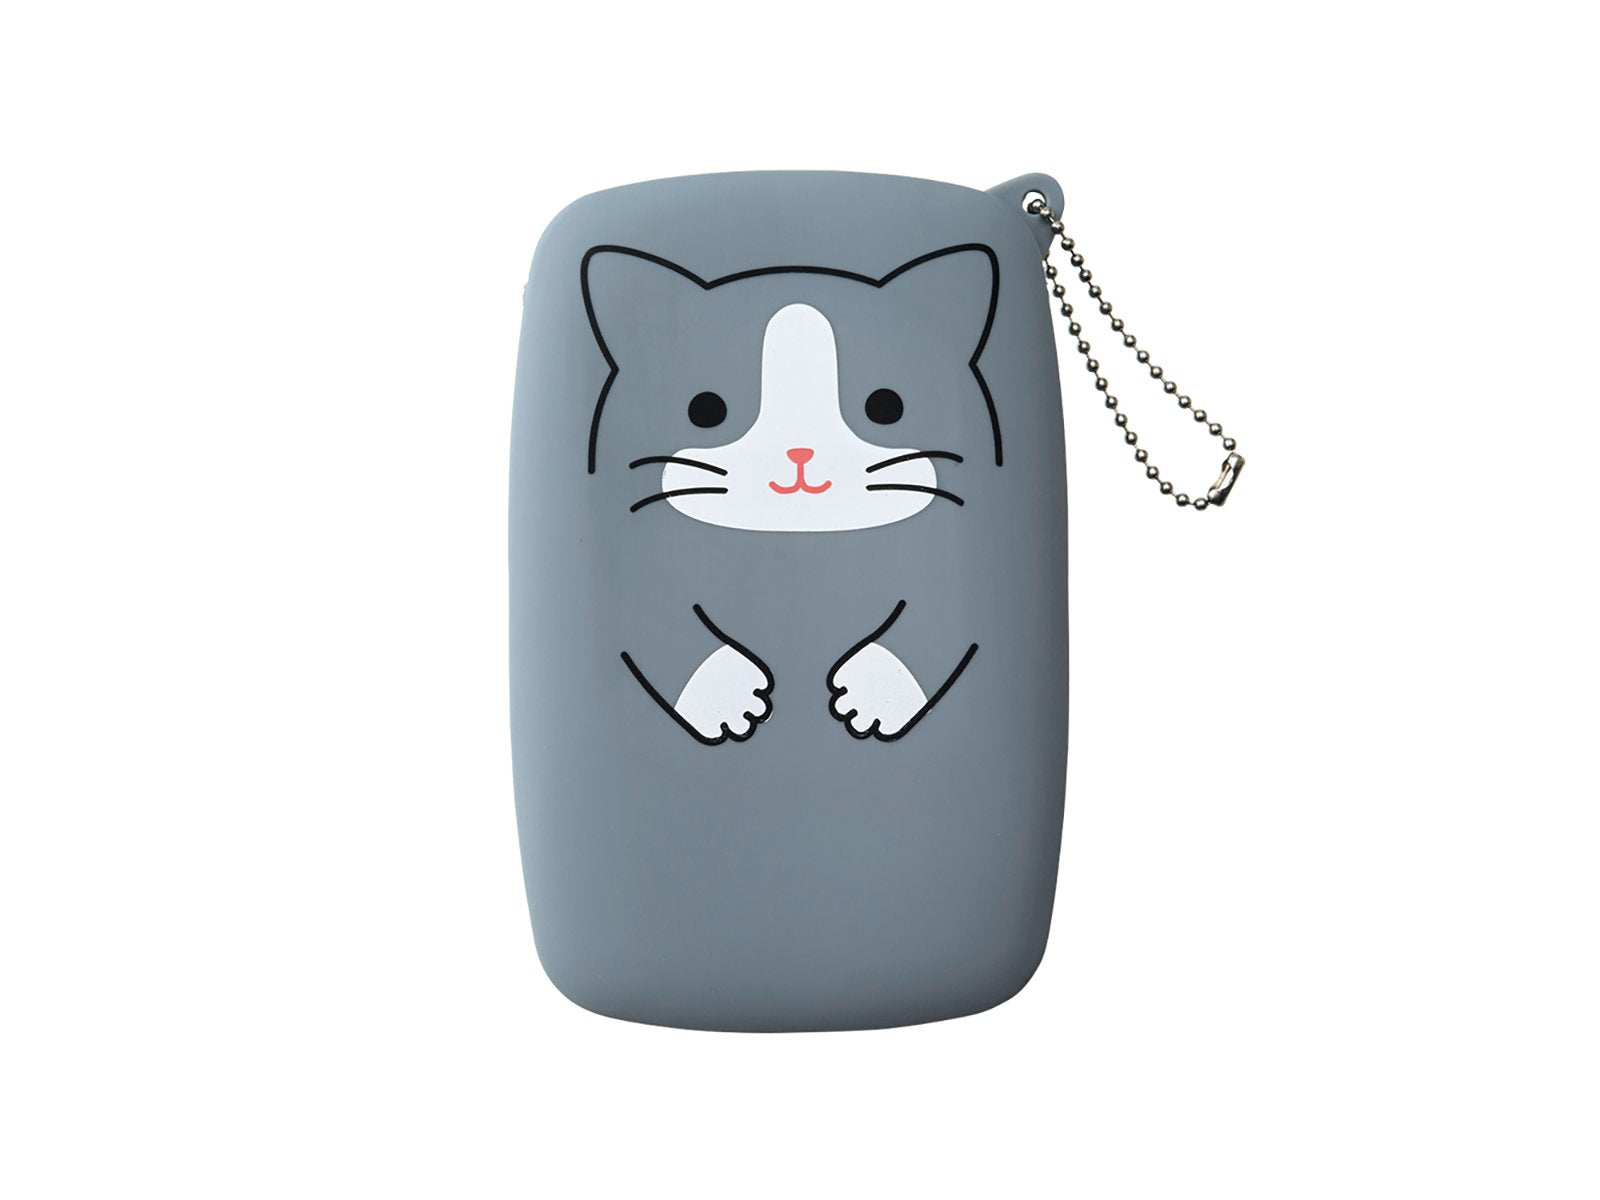 PuniLabo Kitty Squeeze Pouch (Large) gray